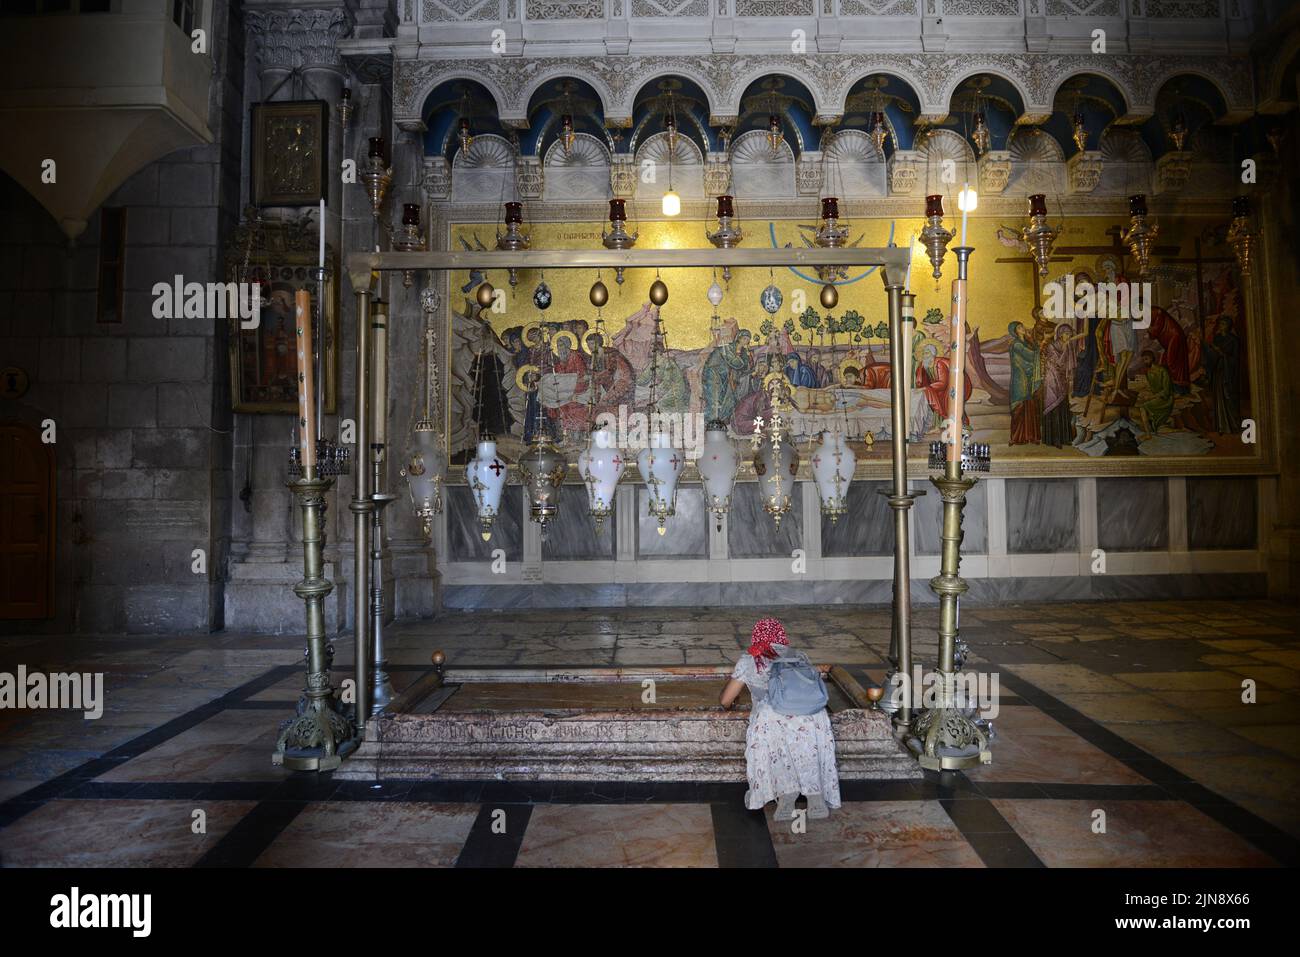 The Stone of Anointing inside the church of the holy Sepulchre in the old city of Jerusalem. Stock Photo